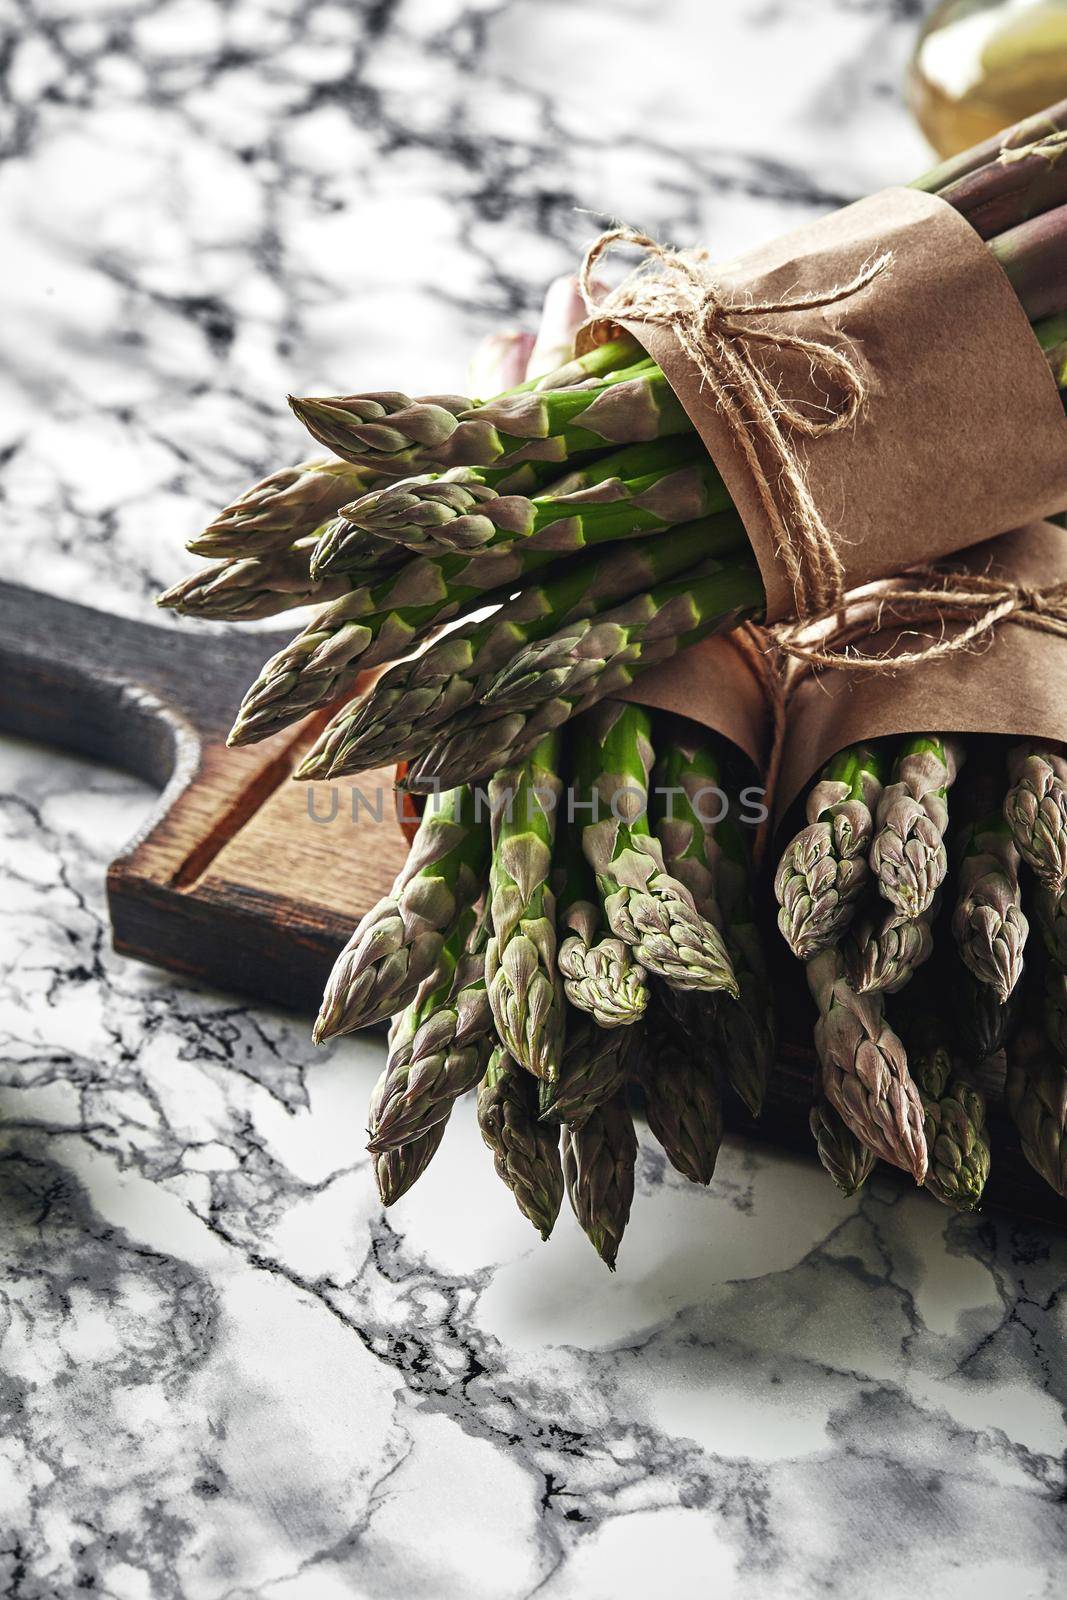 Bunch of an edible, ripe spears of asparagus on a wooden board, marble background. Fresh, green vegetables, top view. Healthy eating. Spring harvest, agricultural farming concept.